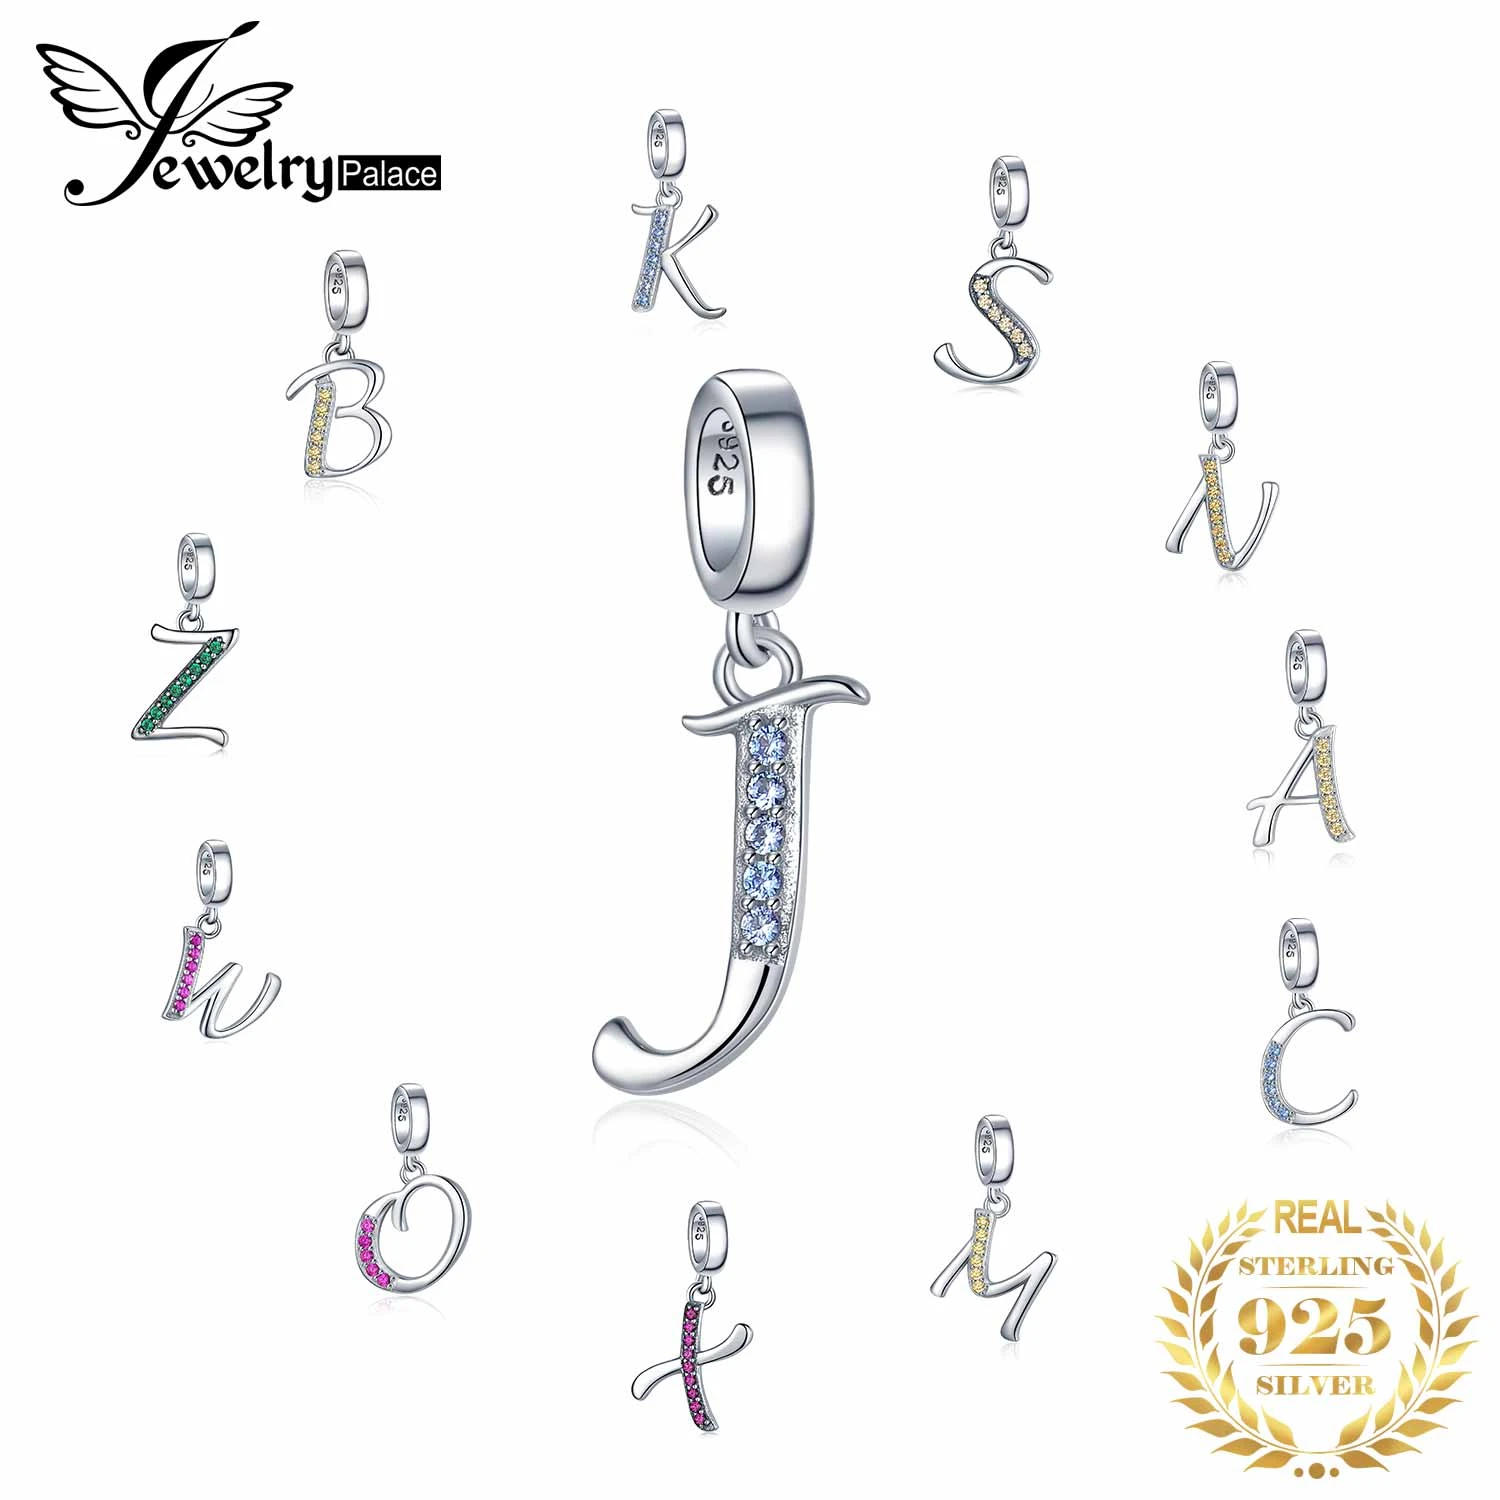 JewelryPalace Initial 925 Sterling Silver Beads Charms For Bracelet Silver 925 original Beads Jewelry Making Pendant Necklace